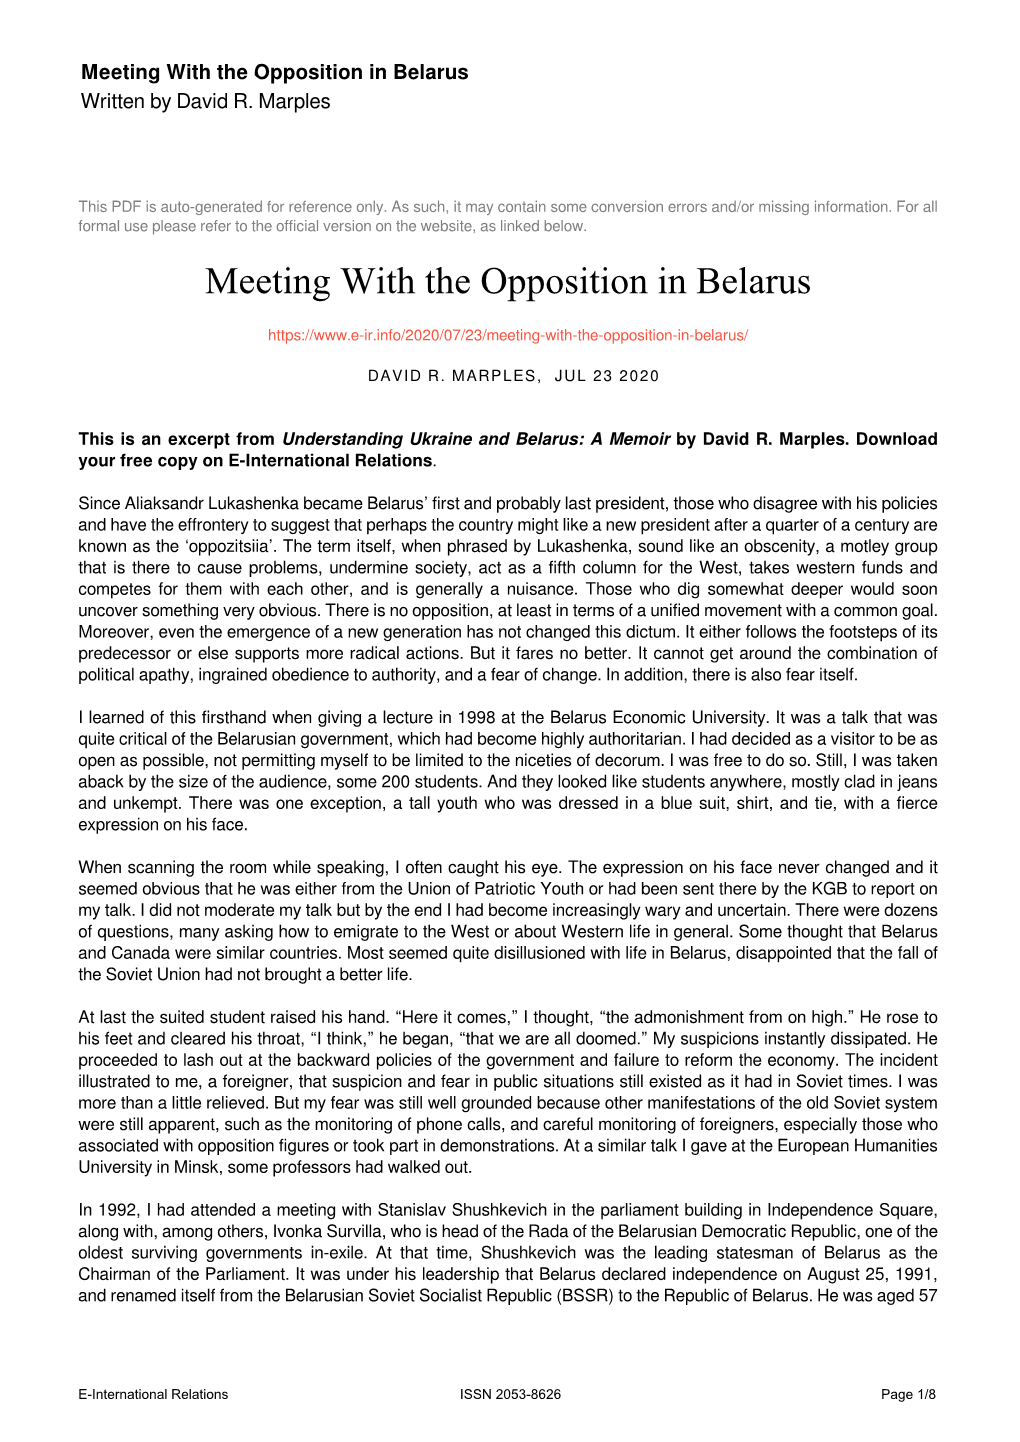 Meeting with the Opposition in Belarus Written by David R